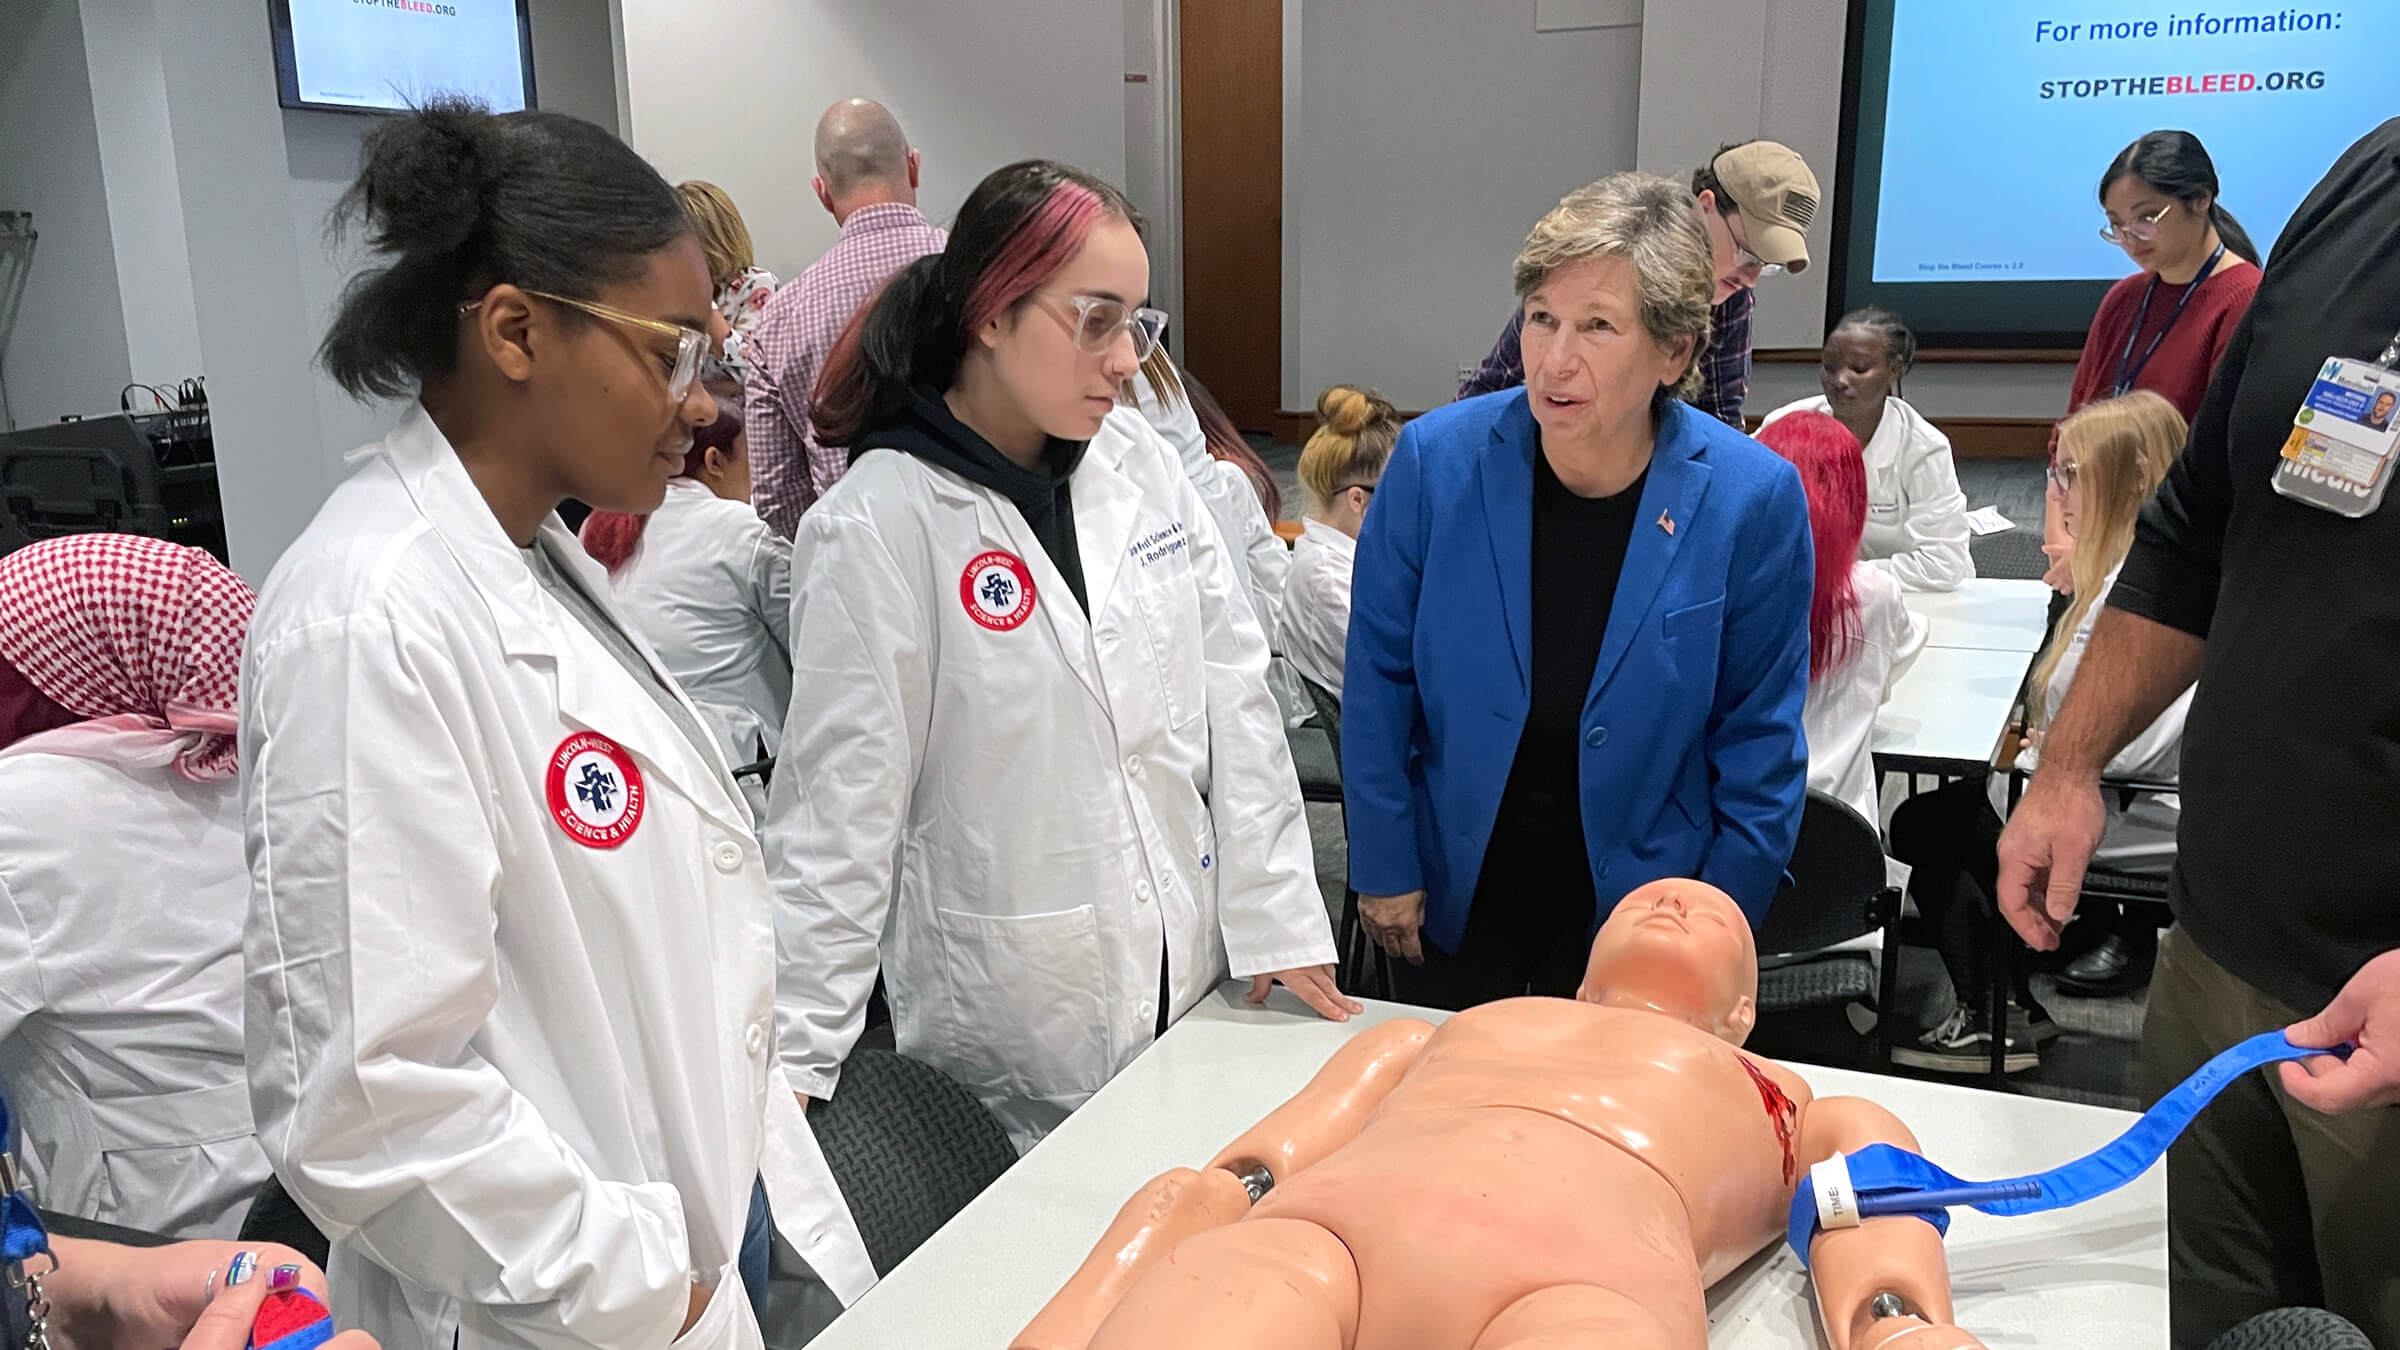 Weingarten, right, with students at Lincoln-West School of Science and Health at MetroHealth hospital in Cleveland on Oct. 24.